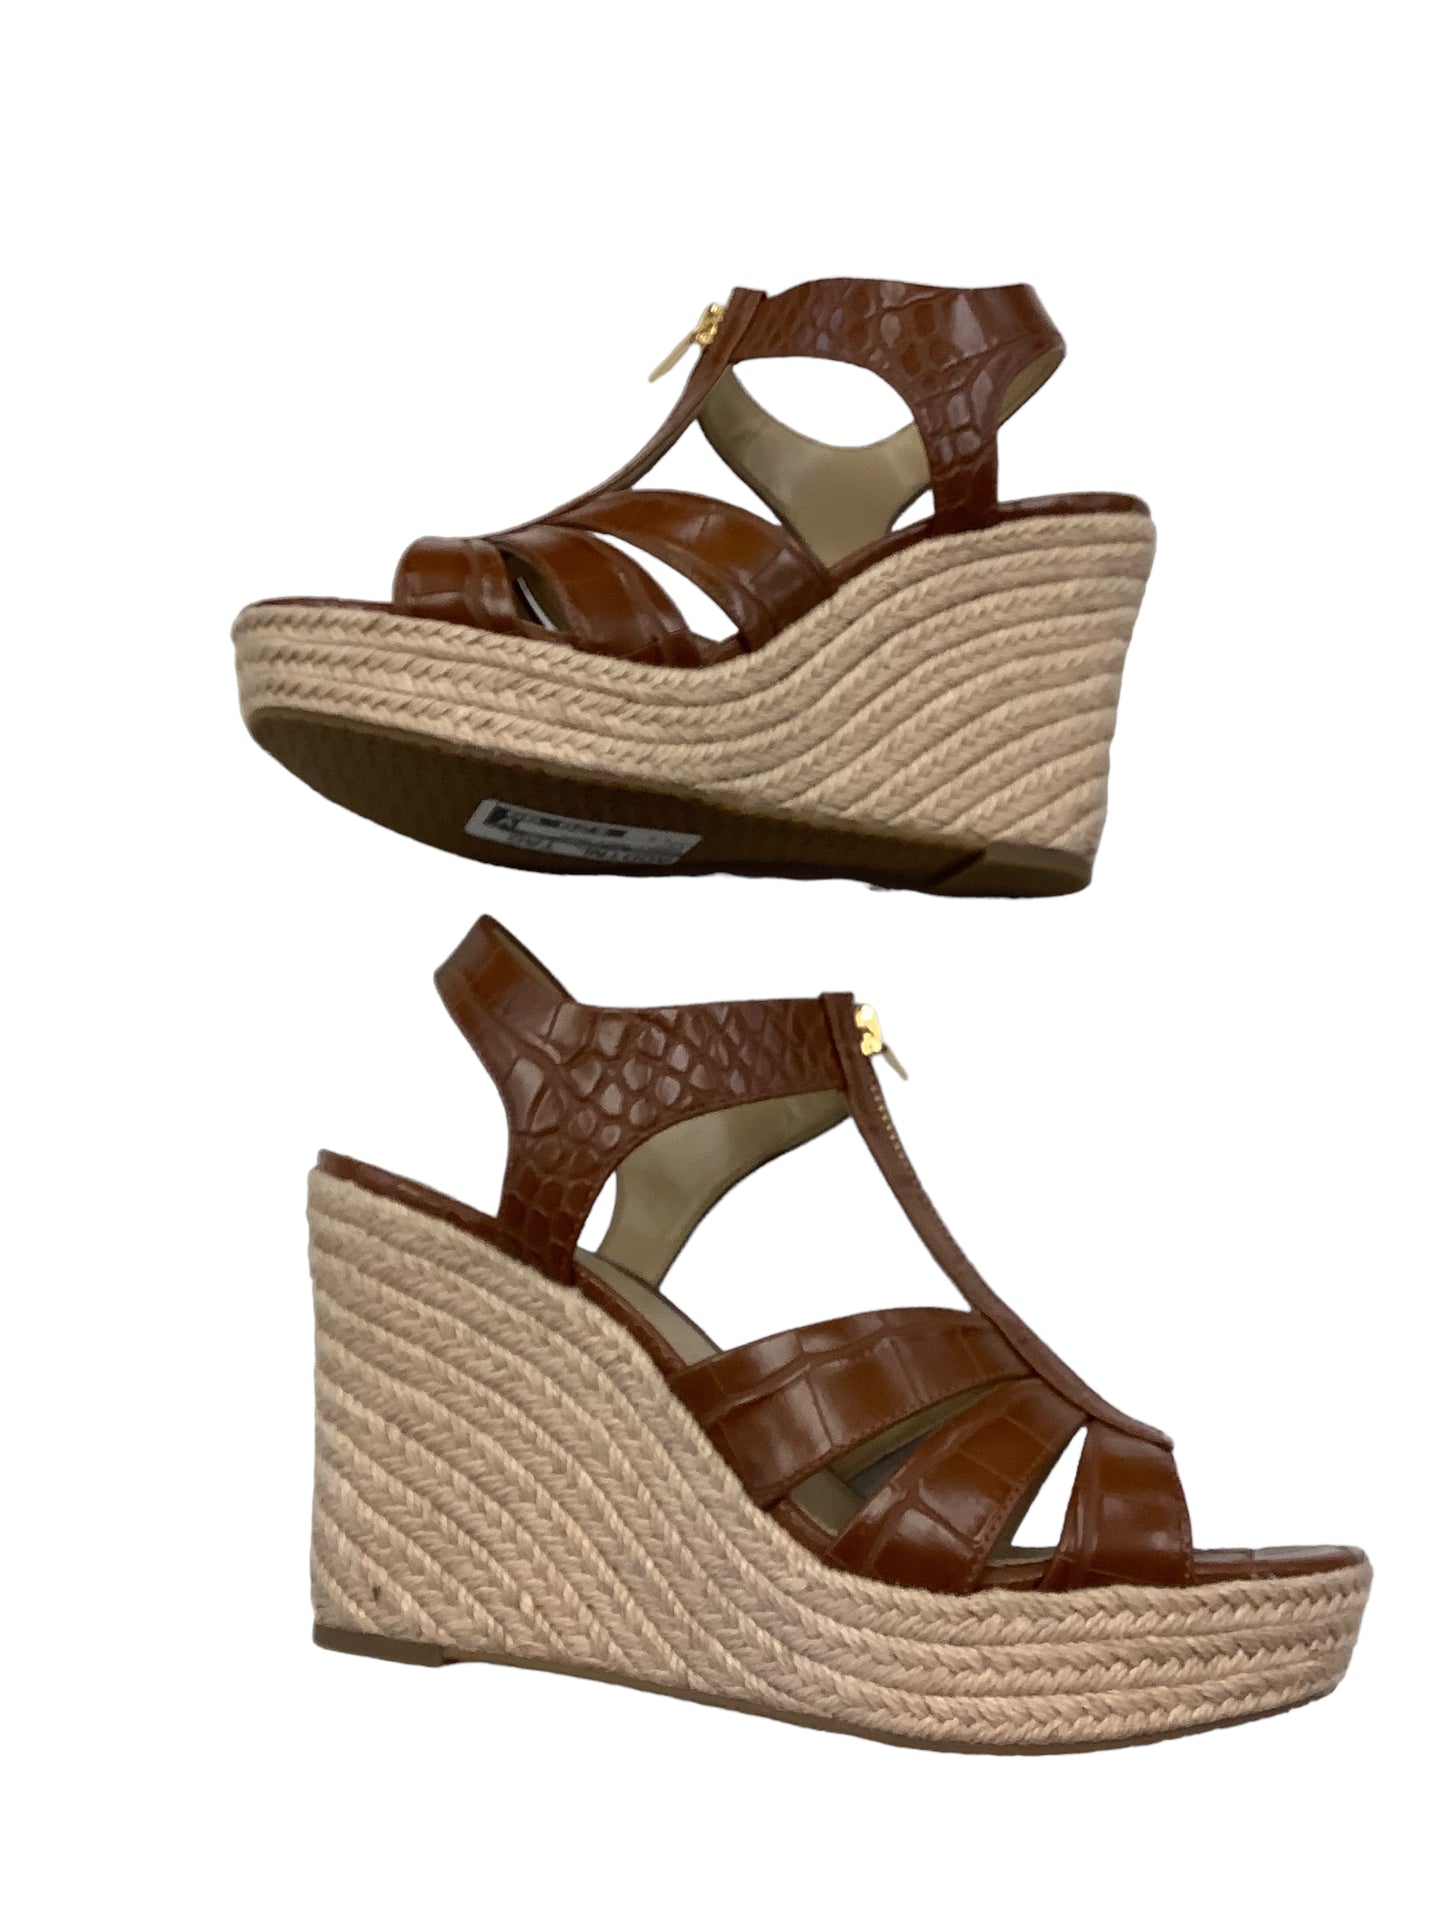 Sandals Heels Wedge By Michael By Michael Kors  Size: 9.5